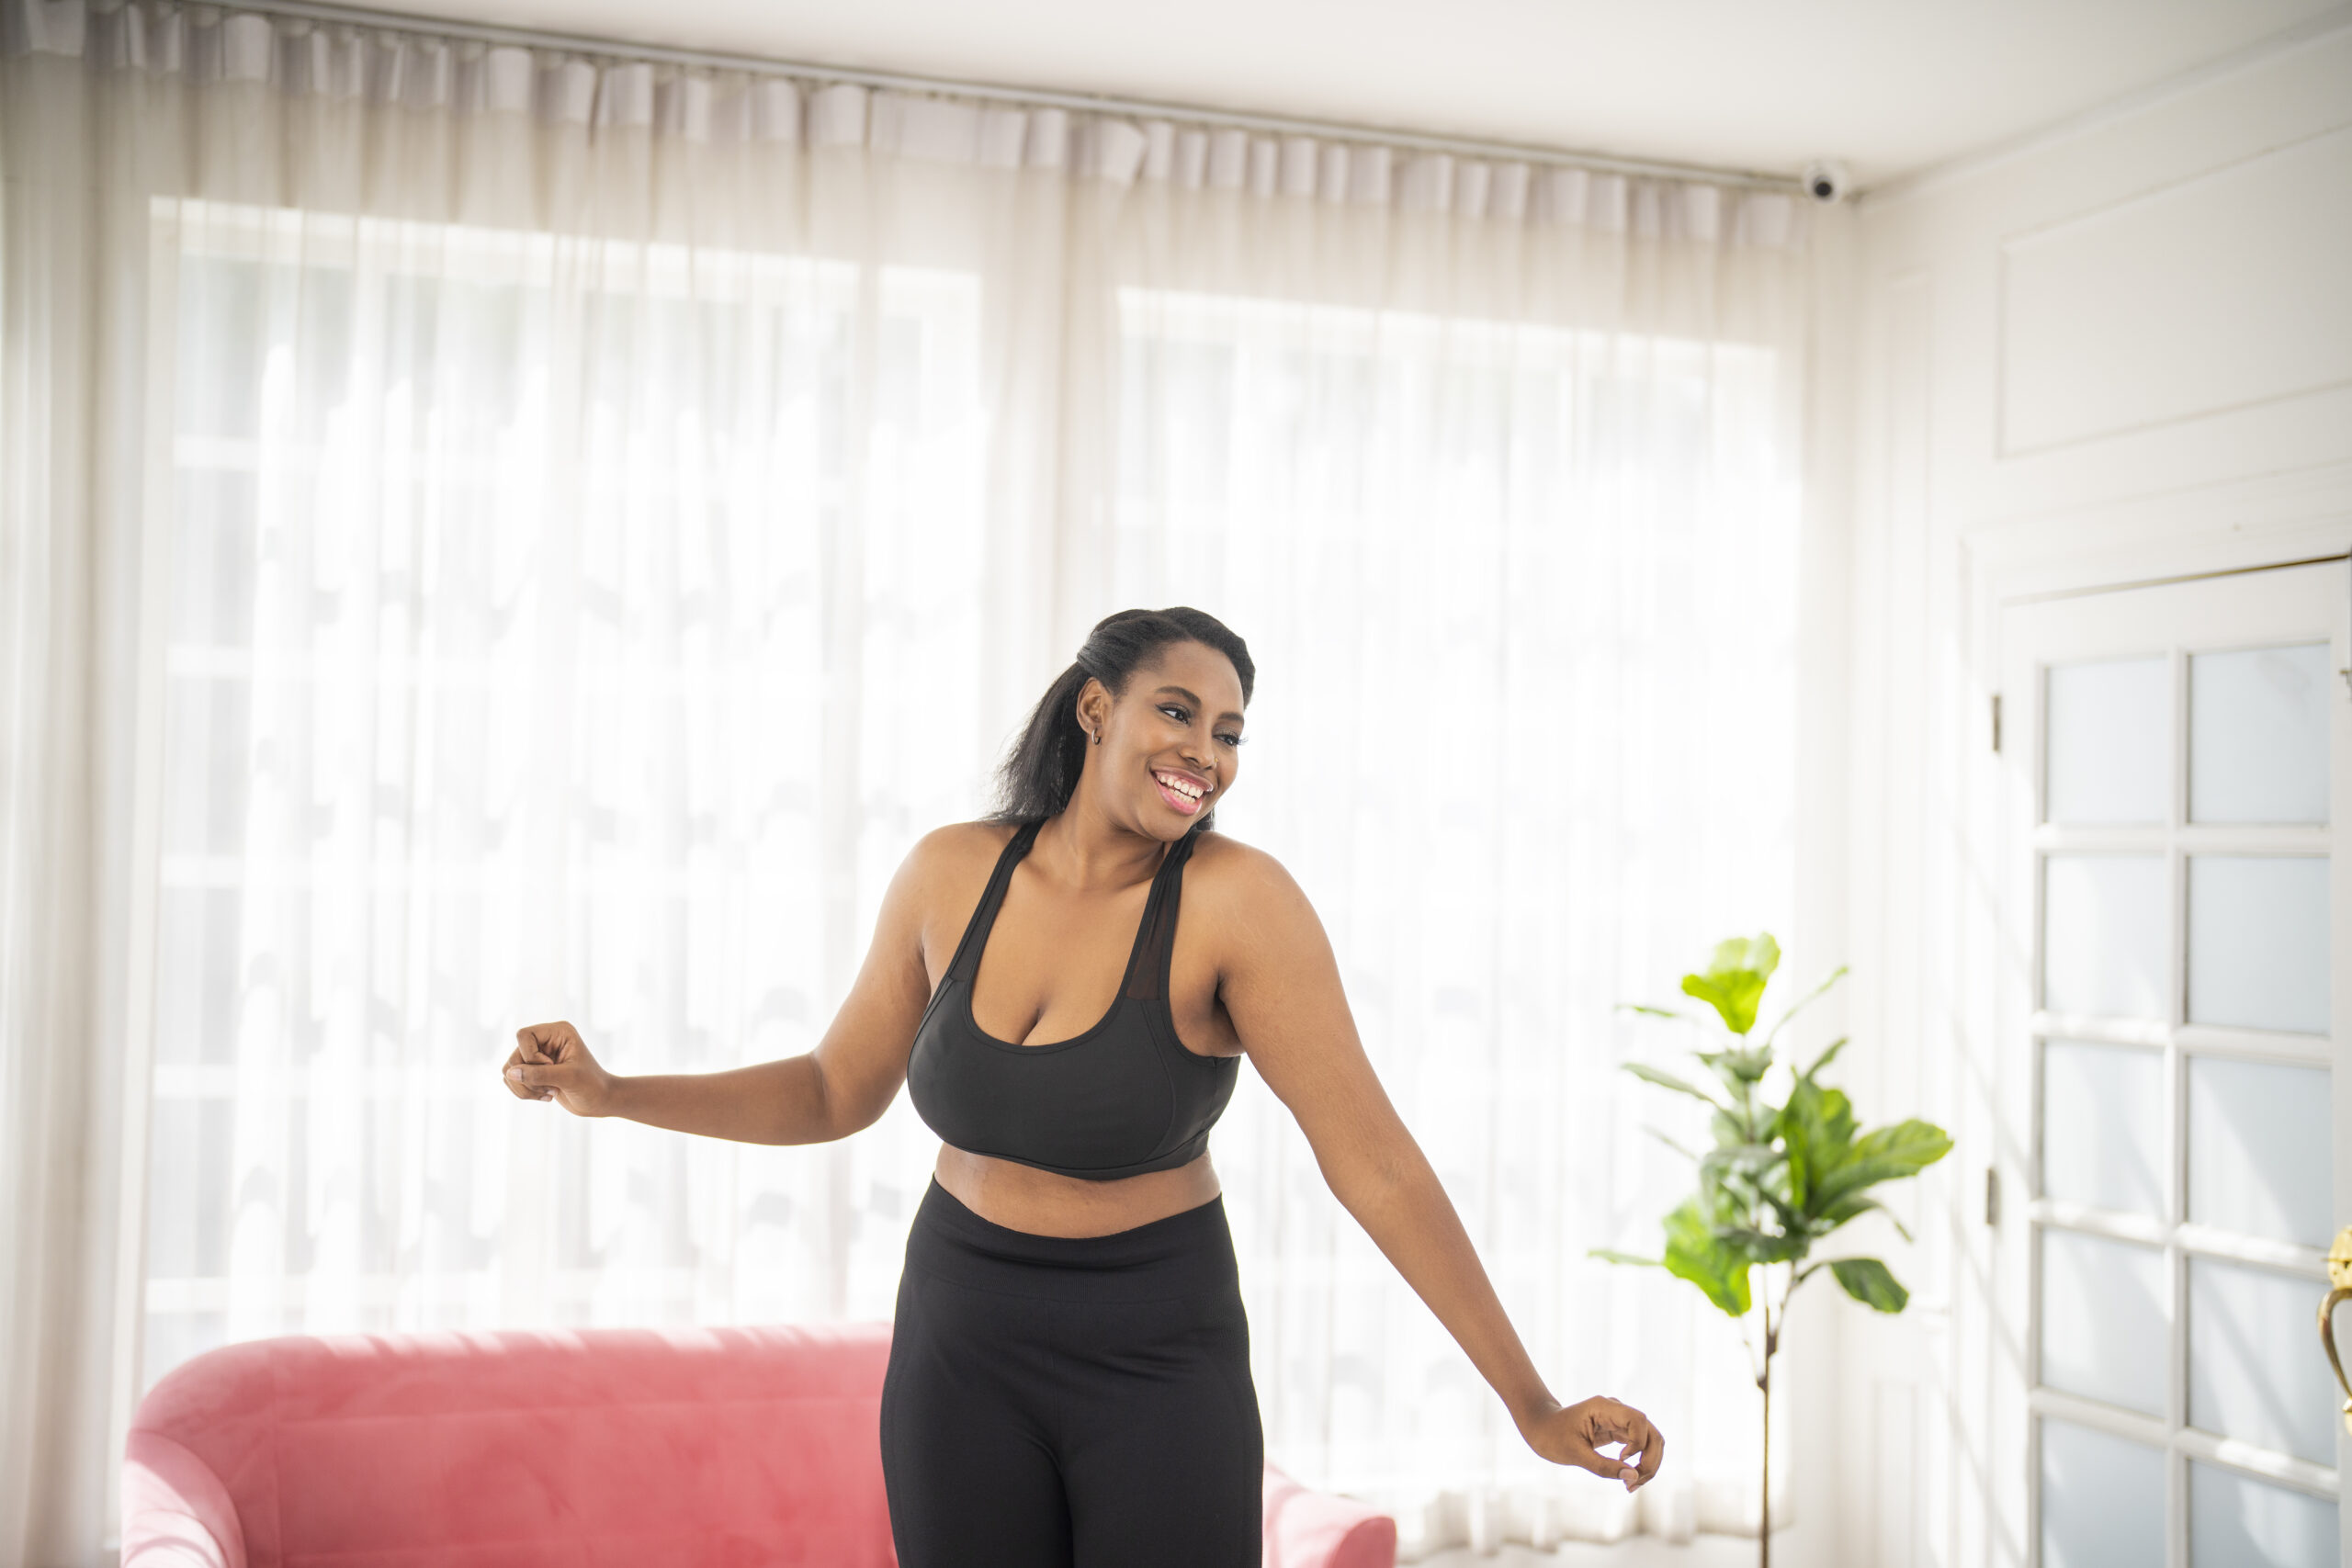 Is The New Era of Fitness Therapeutic or Fatphobic?